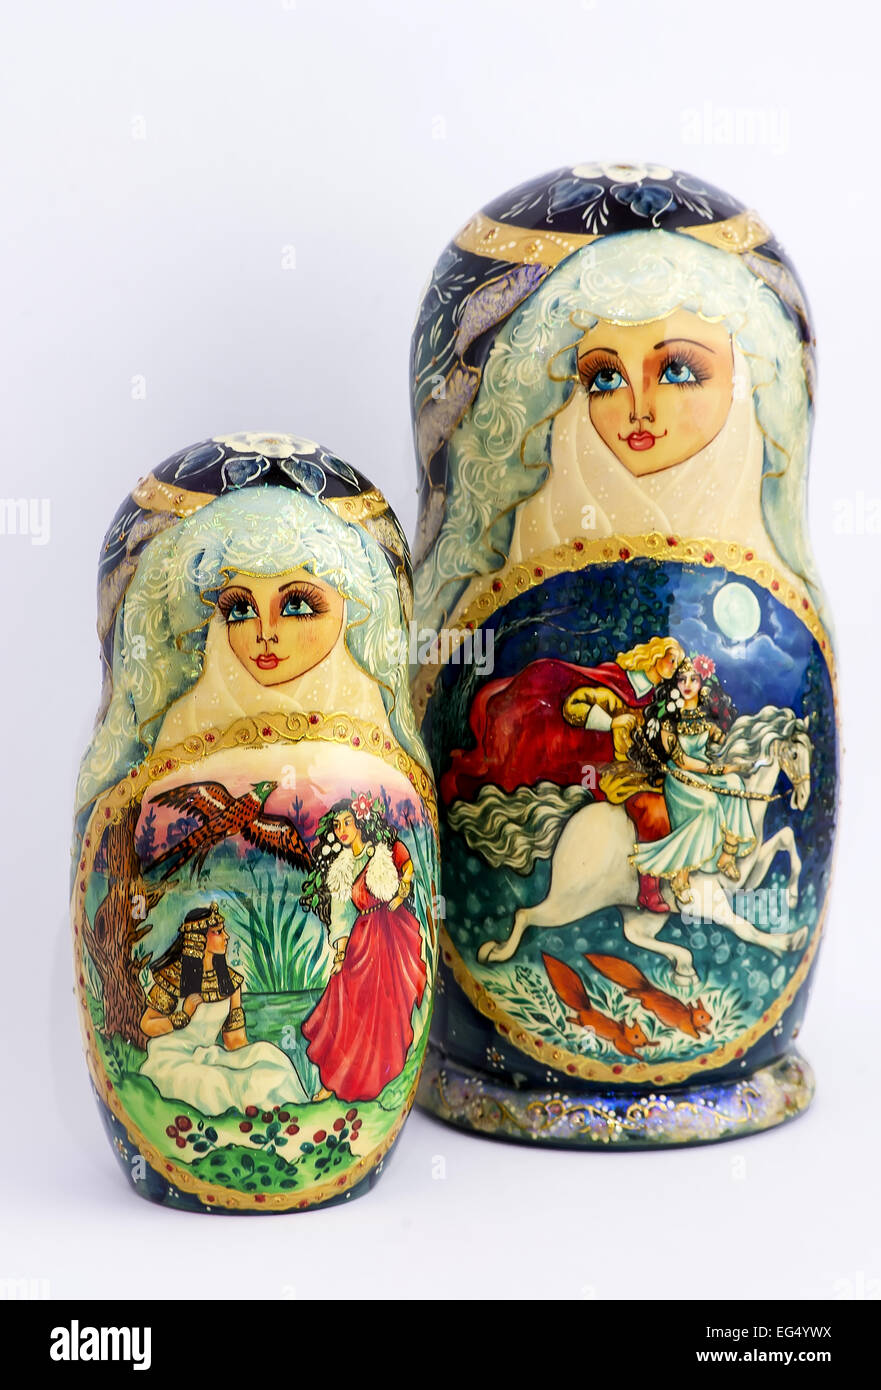 Russia, Russian Nesting Doll, Babushka, Doll, Family, Group of Objects, Growth, In A Row, Traditional Culture, Cheerful, Paint, Stock Photo